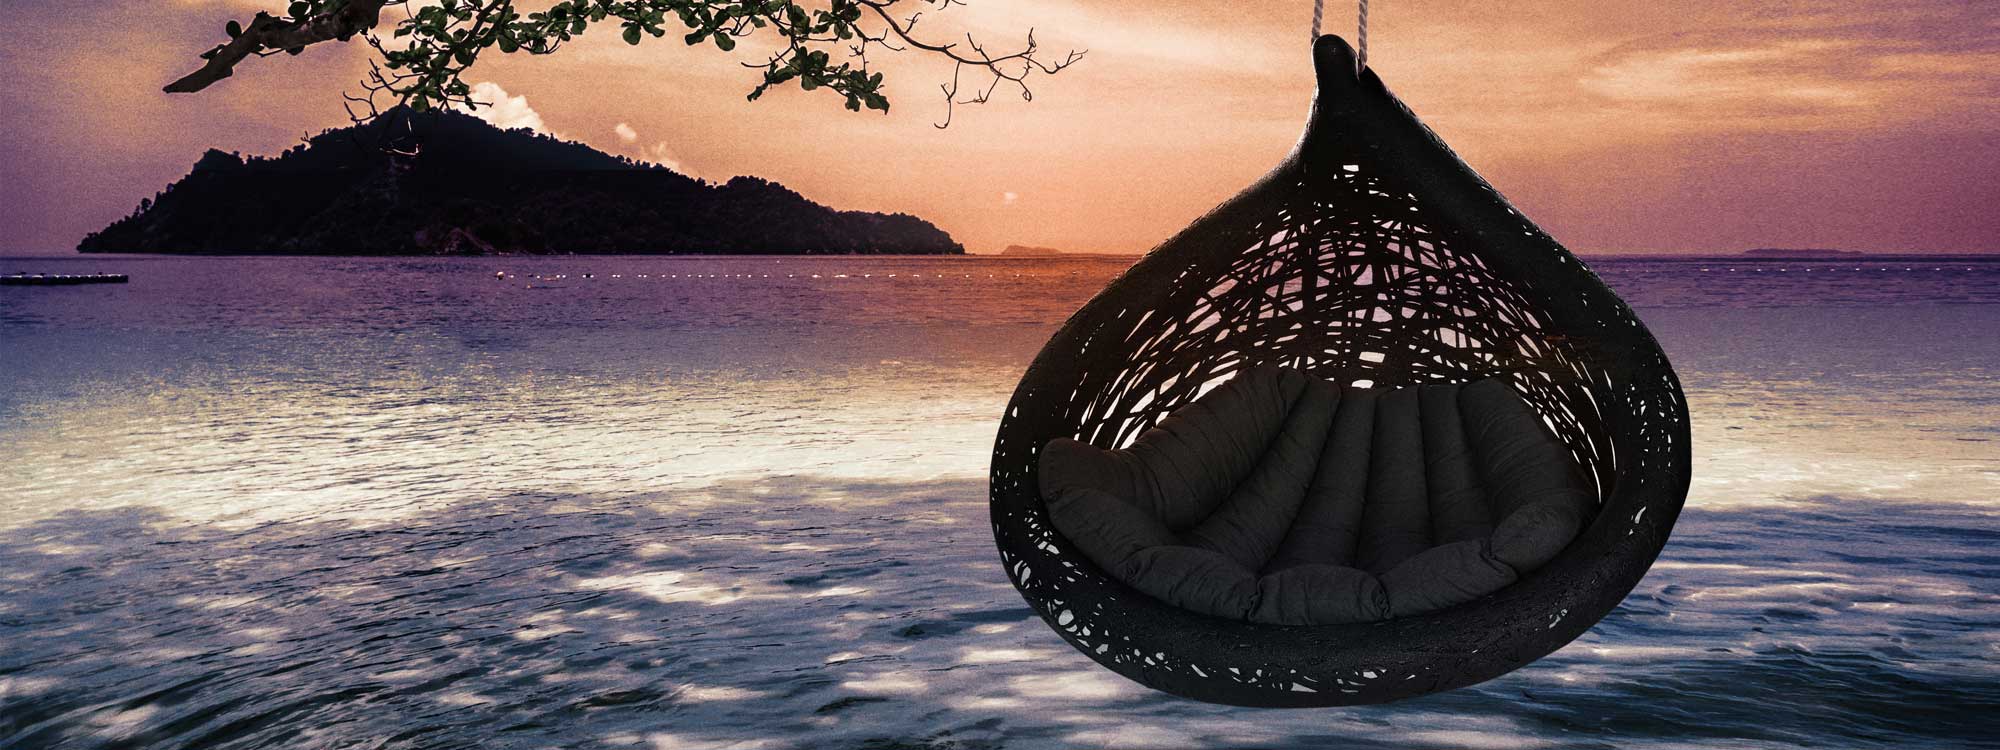 Bios Lucid single swing seat is a unique garden swing chair in high quality garden furniture materials by Unknown magical garden furniture.